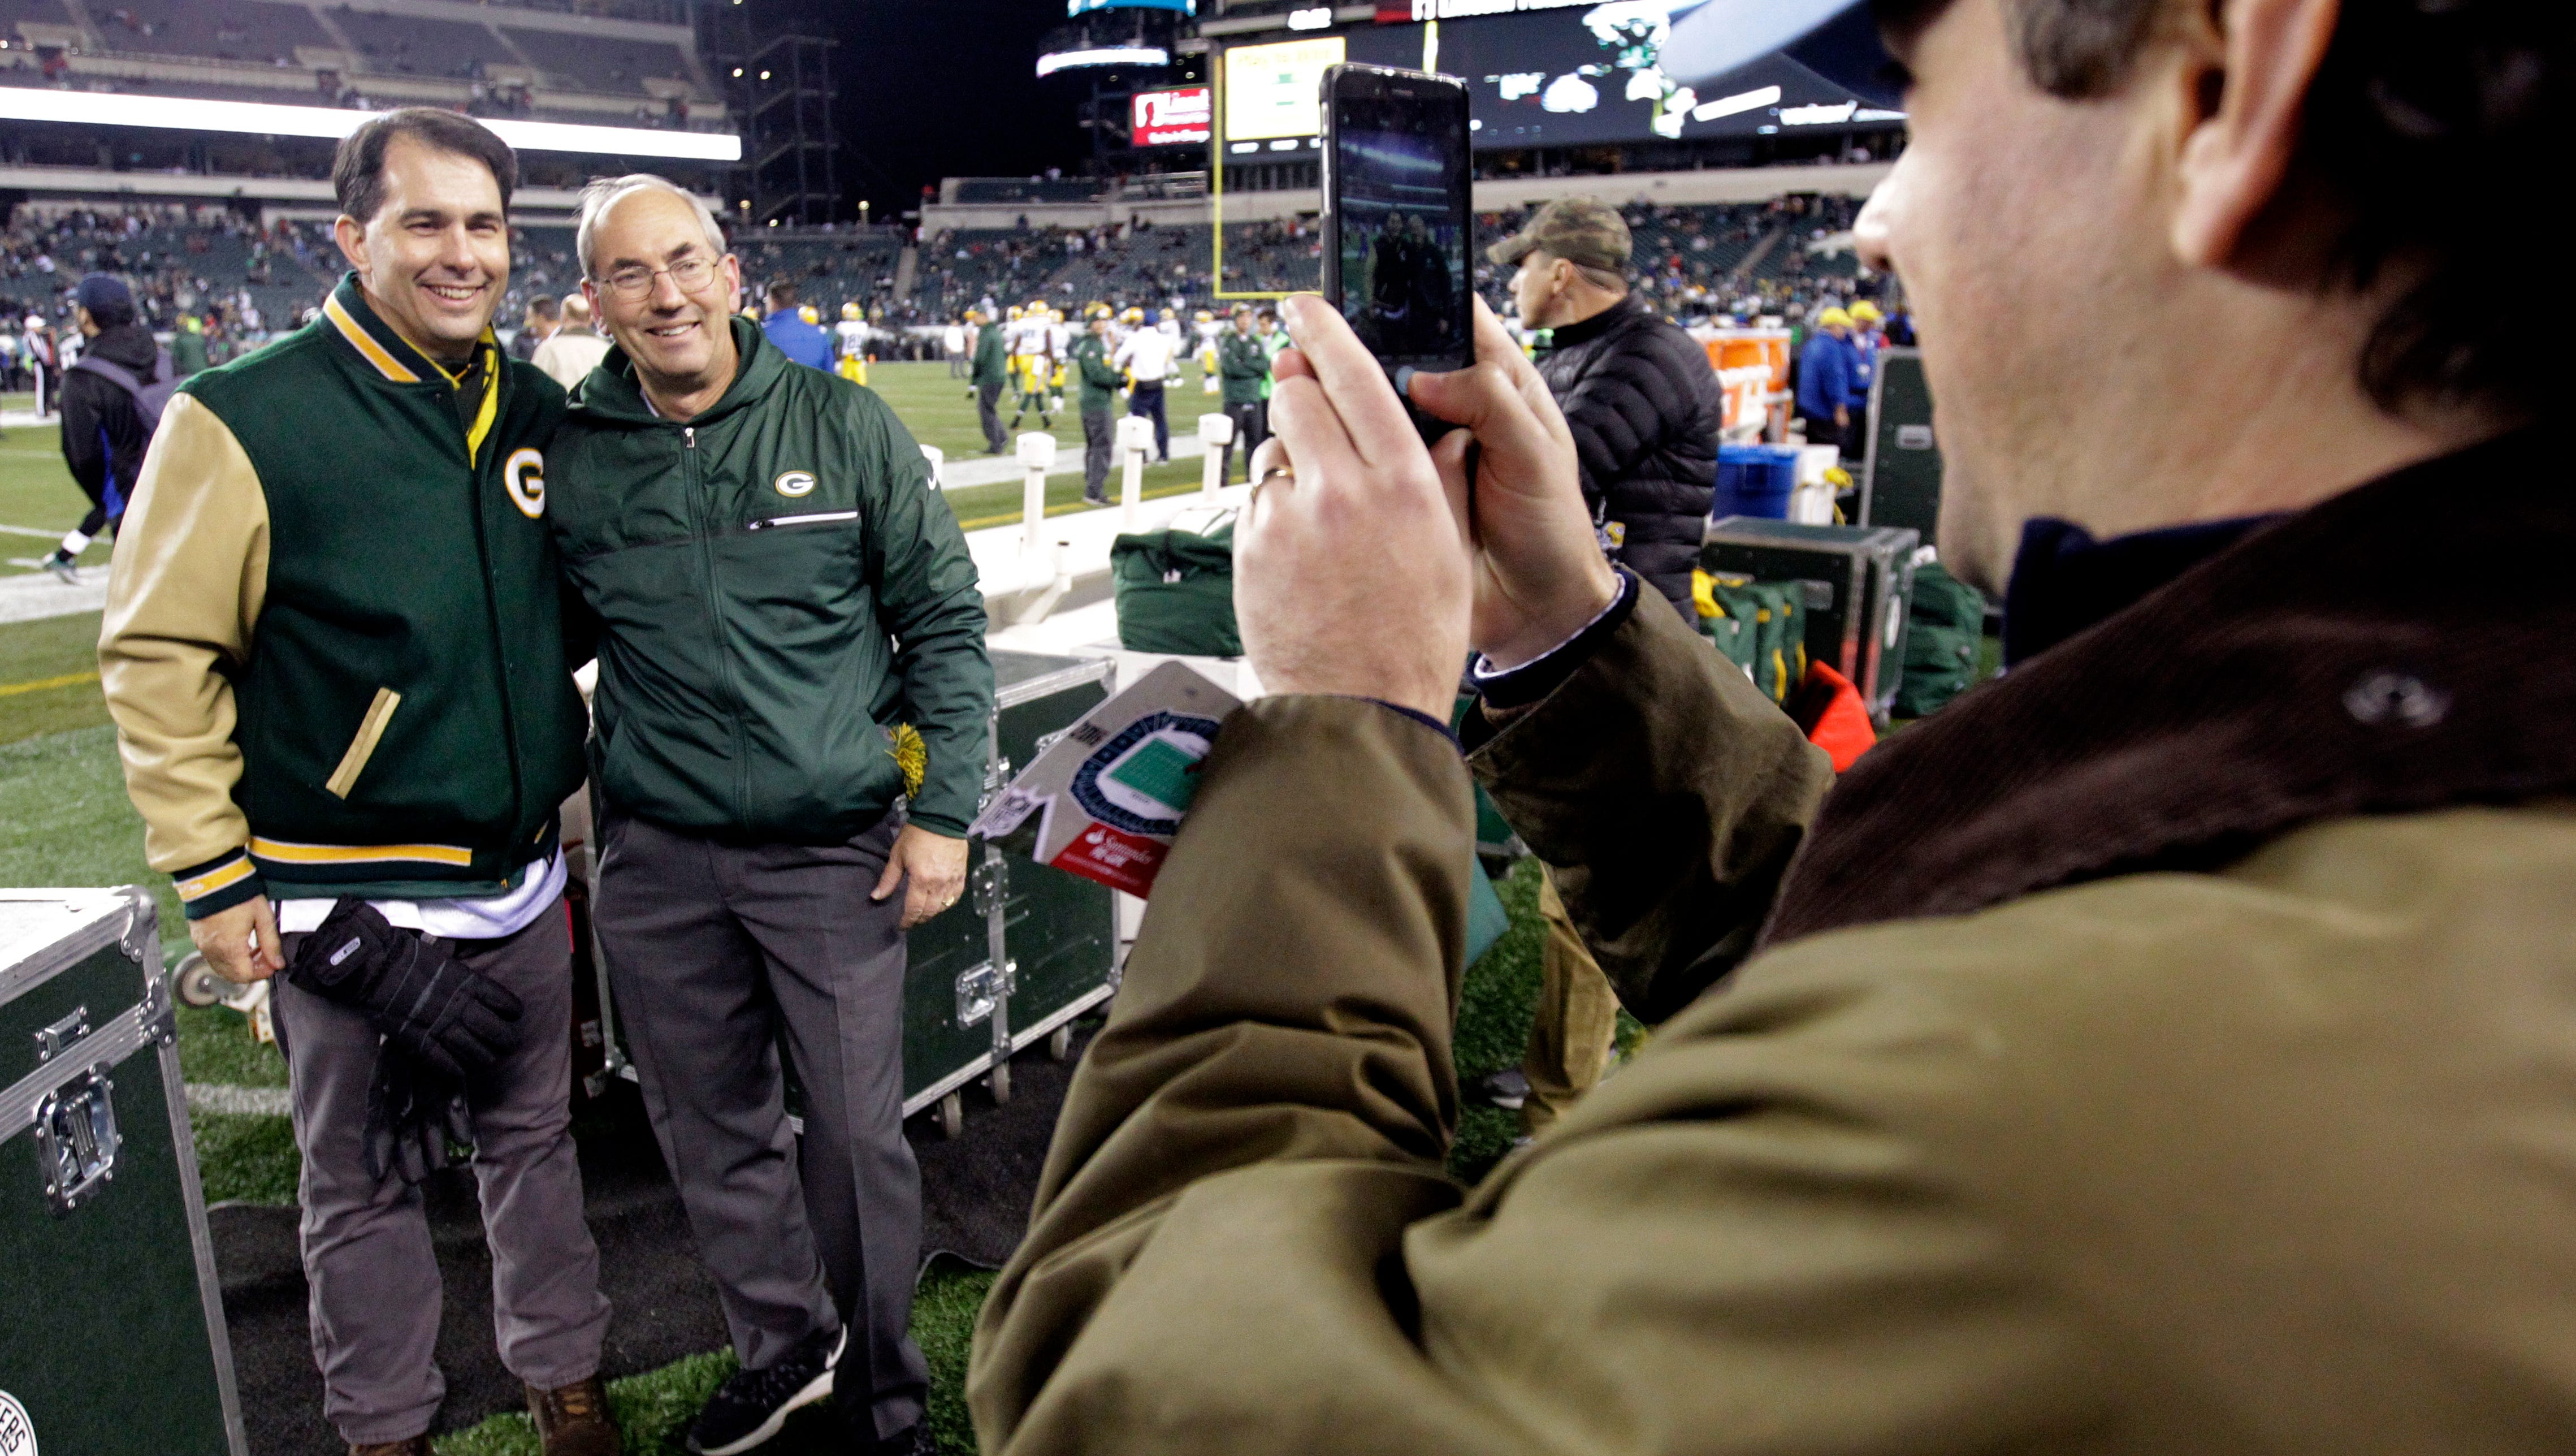 Wisconsin Gov. Scott Walker (left) poses for a photo with Green Bay Packers assistant equipment manager Bryan Nehring before the Packers game against the Philadelphia Eagles.